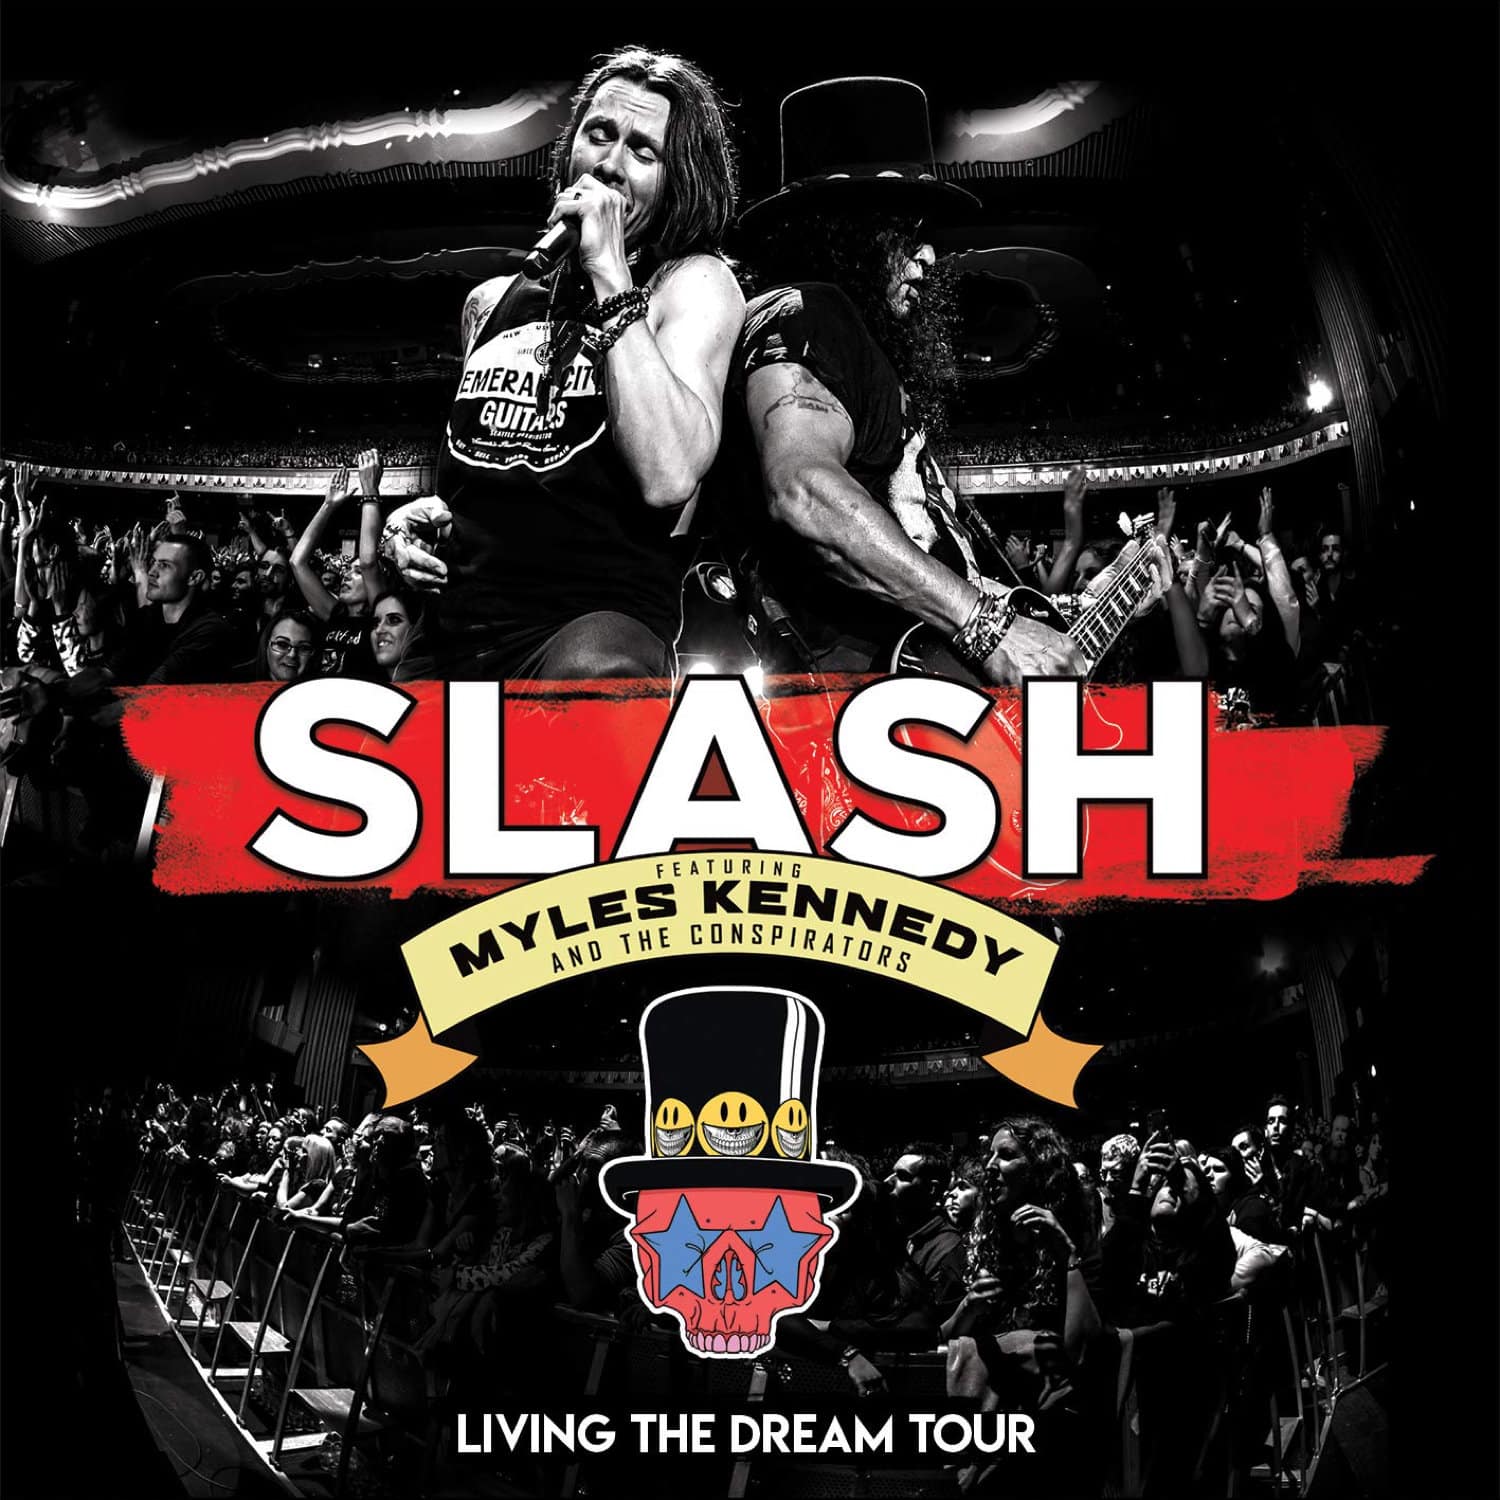 SLASH Featuring MYLES KENNEDY and THE CONSPIRATORS Paris Move